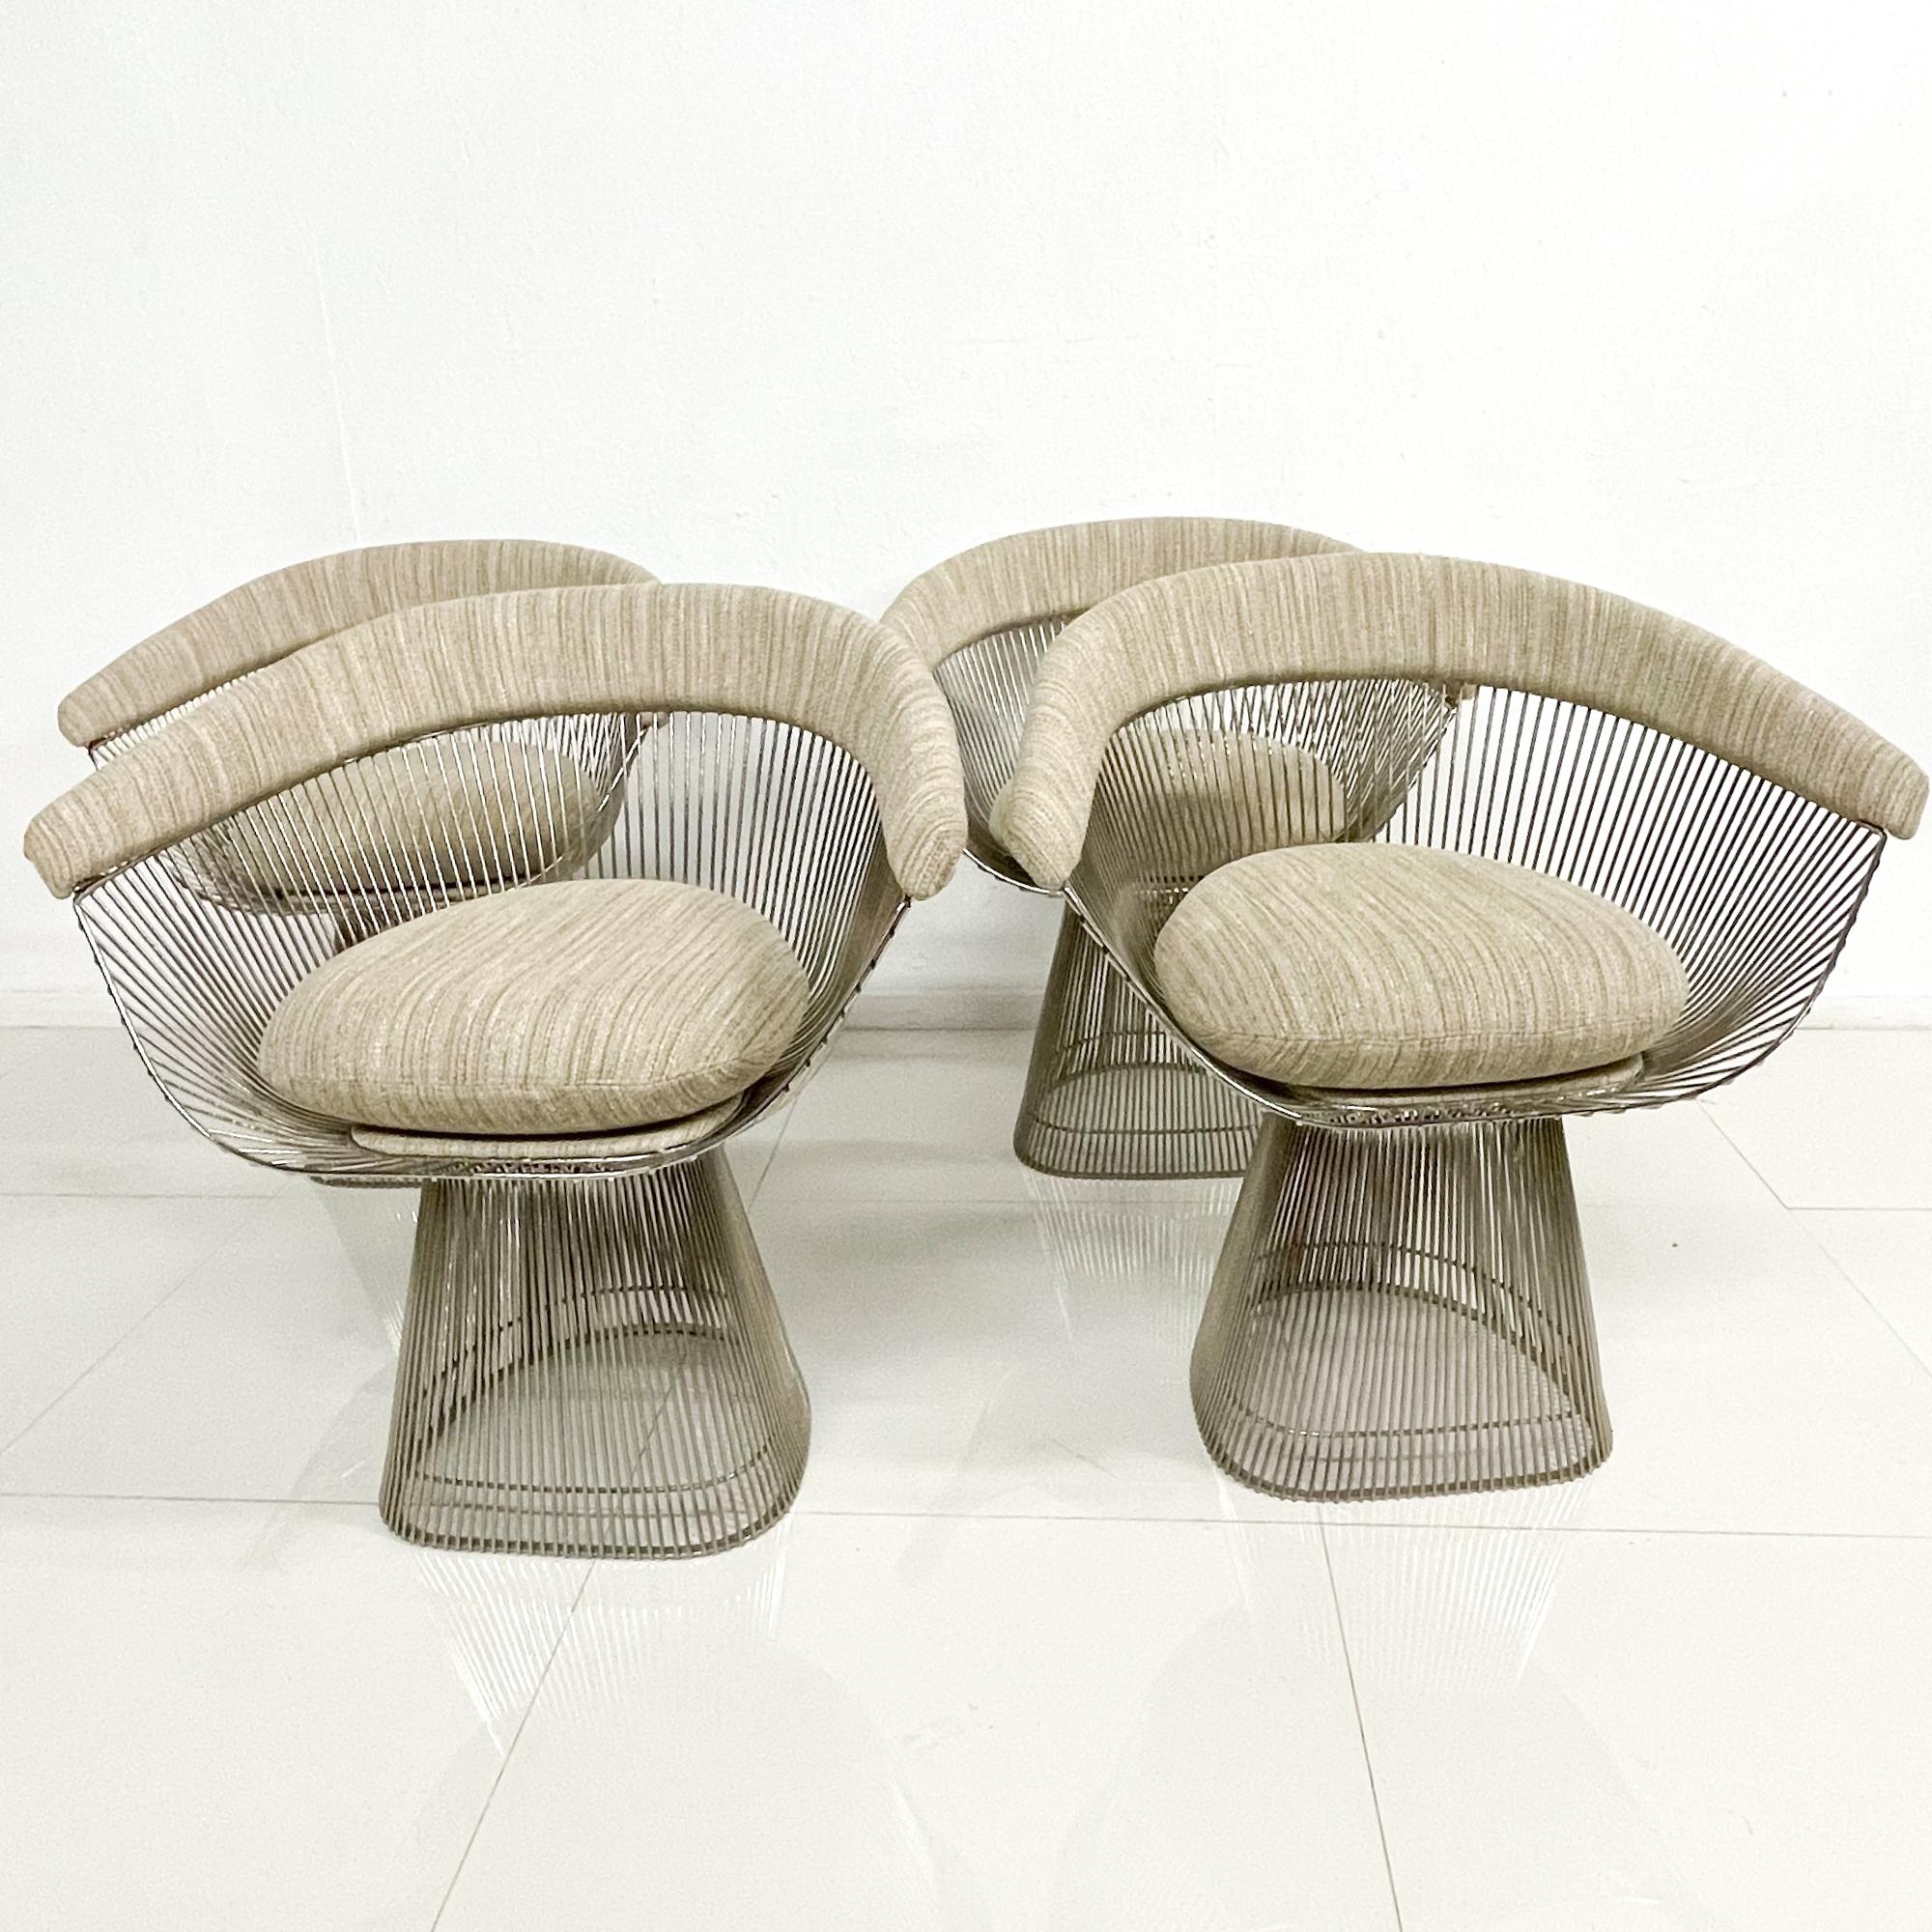 American Warren Platner Dining Table and Chairs for Knoll Mid-Century Modern